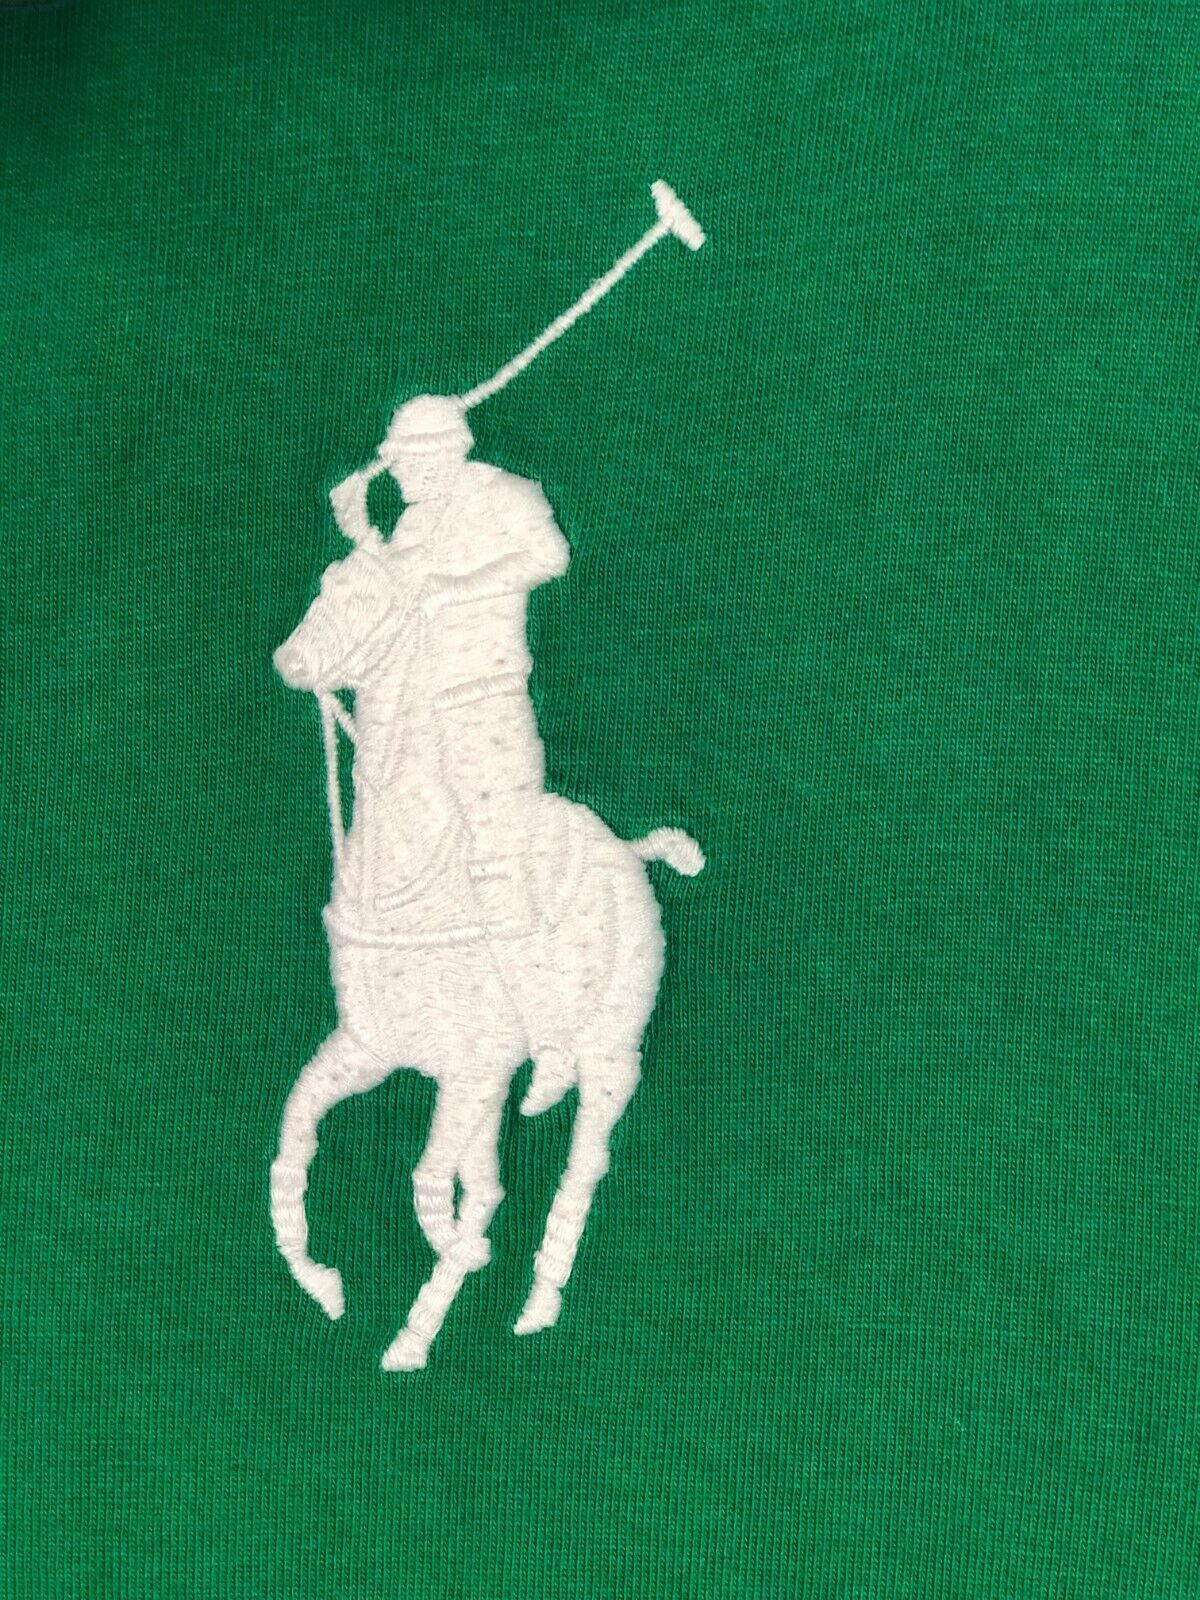 Vintage Polo Ralph Lauren Rugby Suicide Ski Patch Shirt Pony Kelly ...